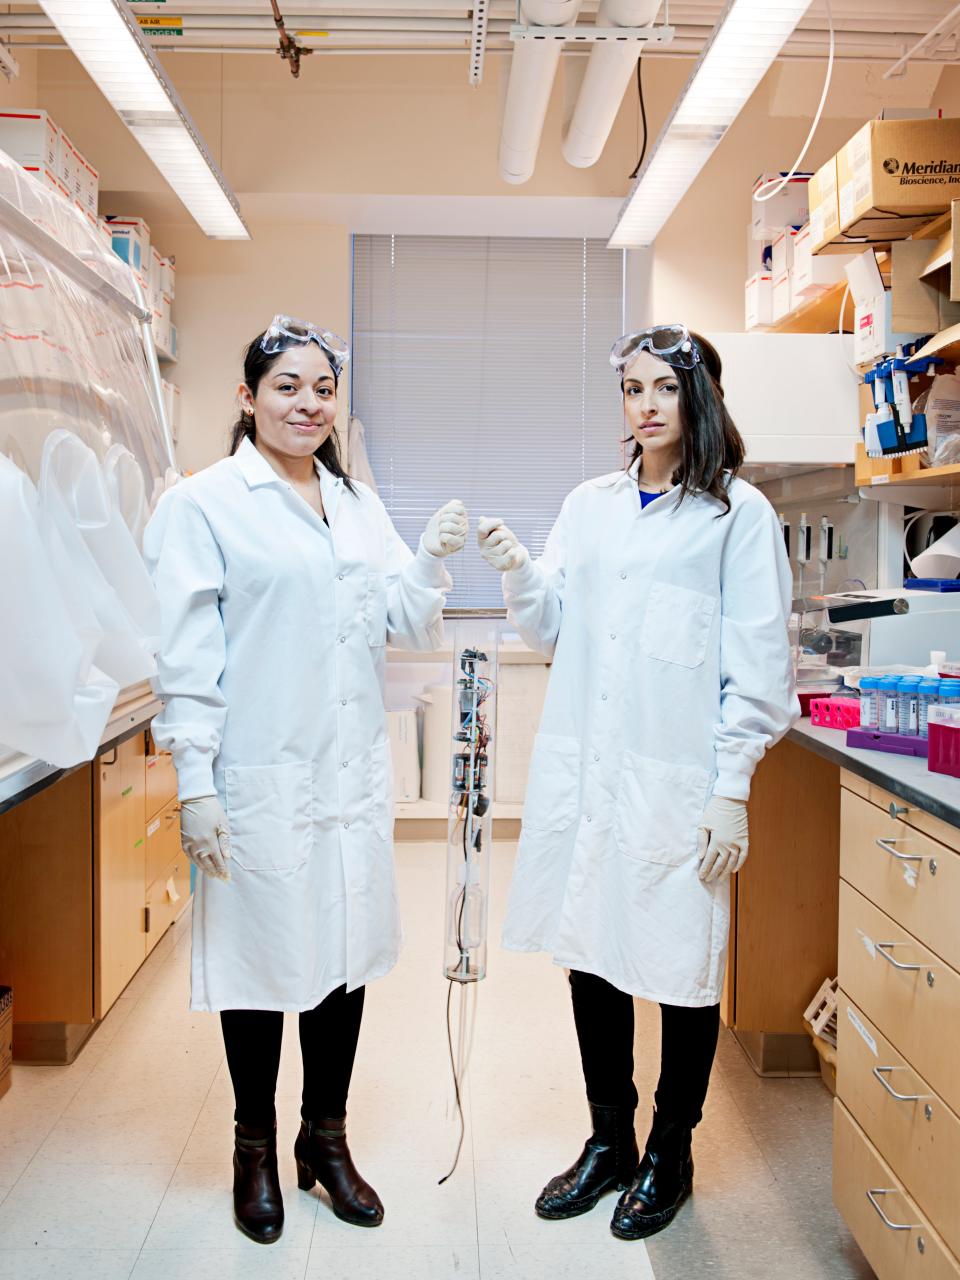 Mariana Matus, left, and Newsha Ghaeli, right, co-founded BioBot Analytics and now serve as CEO and president, respectively. Headquartered in Cambridge, Massachusetts, BioBot analyzes daily samples from more than 200 sewage treatment plants across the country to track COVID-19 trends. The data can often detect a rise or fall in the amount of COVID-19 in a community about a week before traditional surveillance methods like nose swabs.